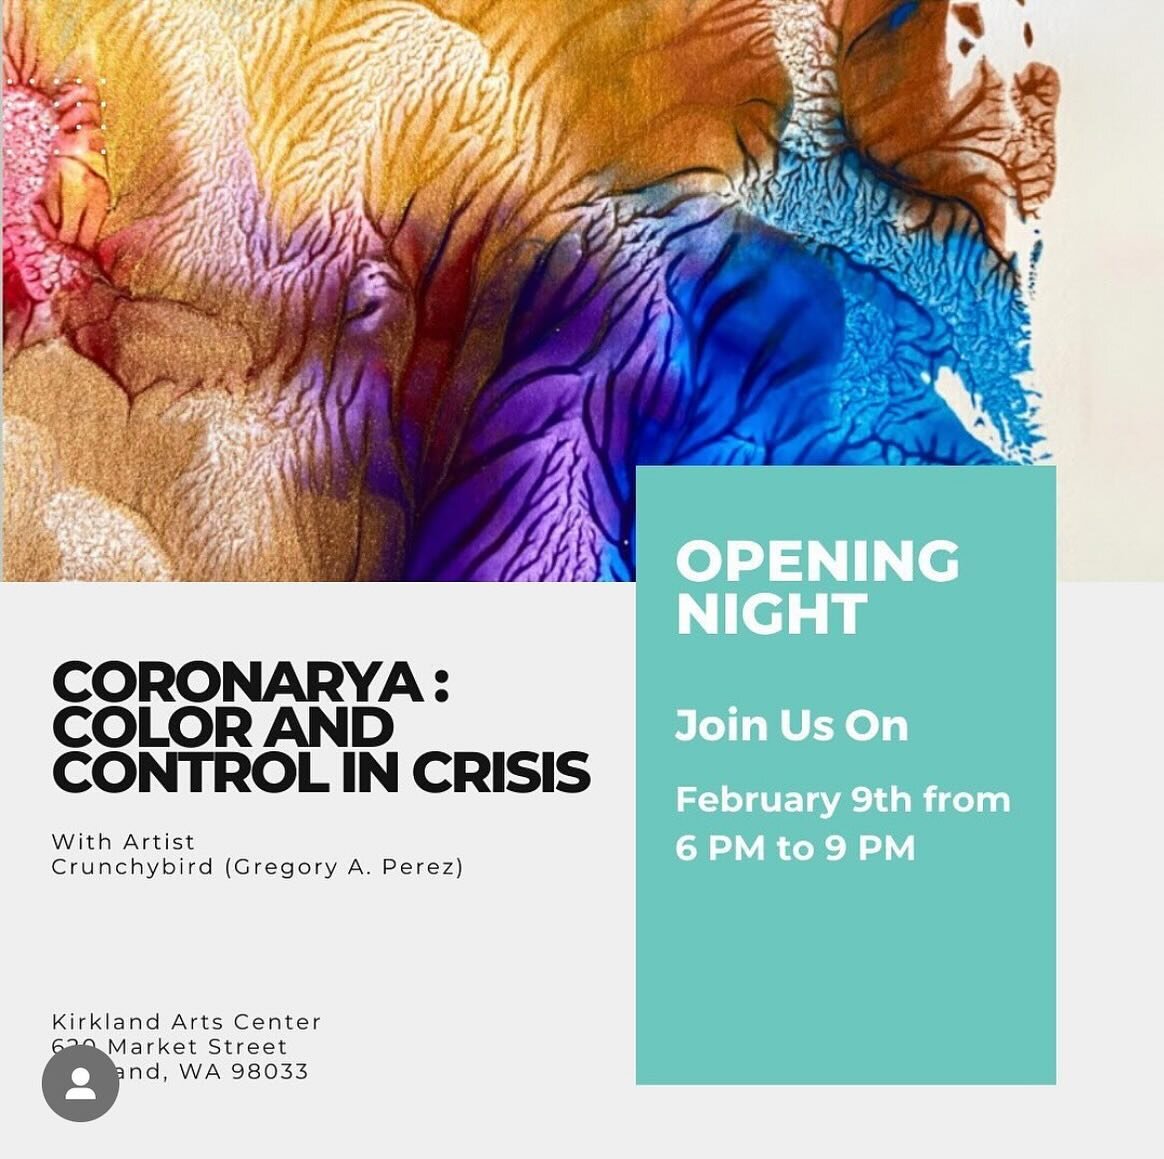 In February, I&rsquo;ll be unveiling &ldquo;Coronarya&rdquo; a collection of some of my favorite peel paintings created during the COVID-19 pandemic at the Kirkland Art Center in downtown Kirkland.

Coronarya started as a way for me and Oscar to pass